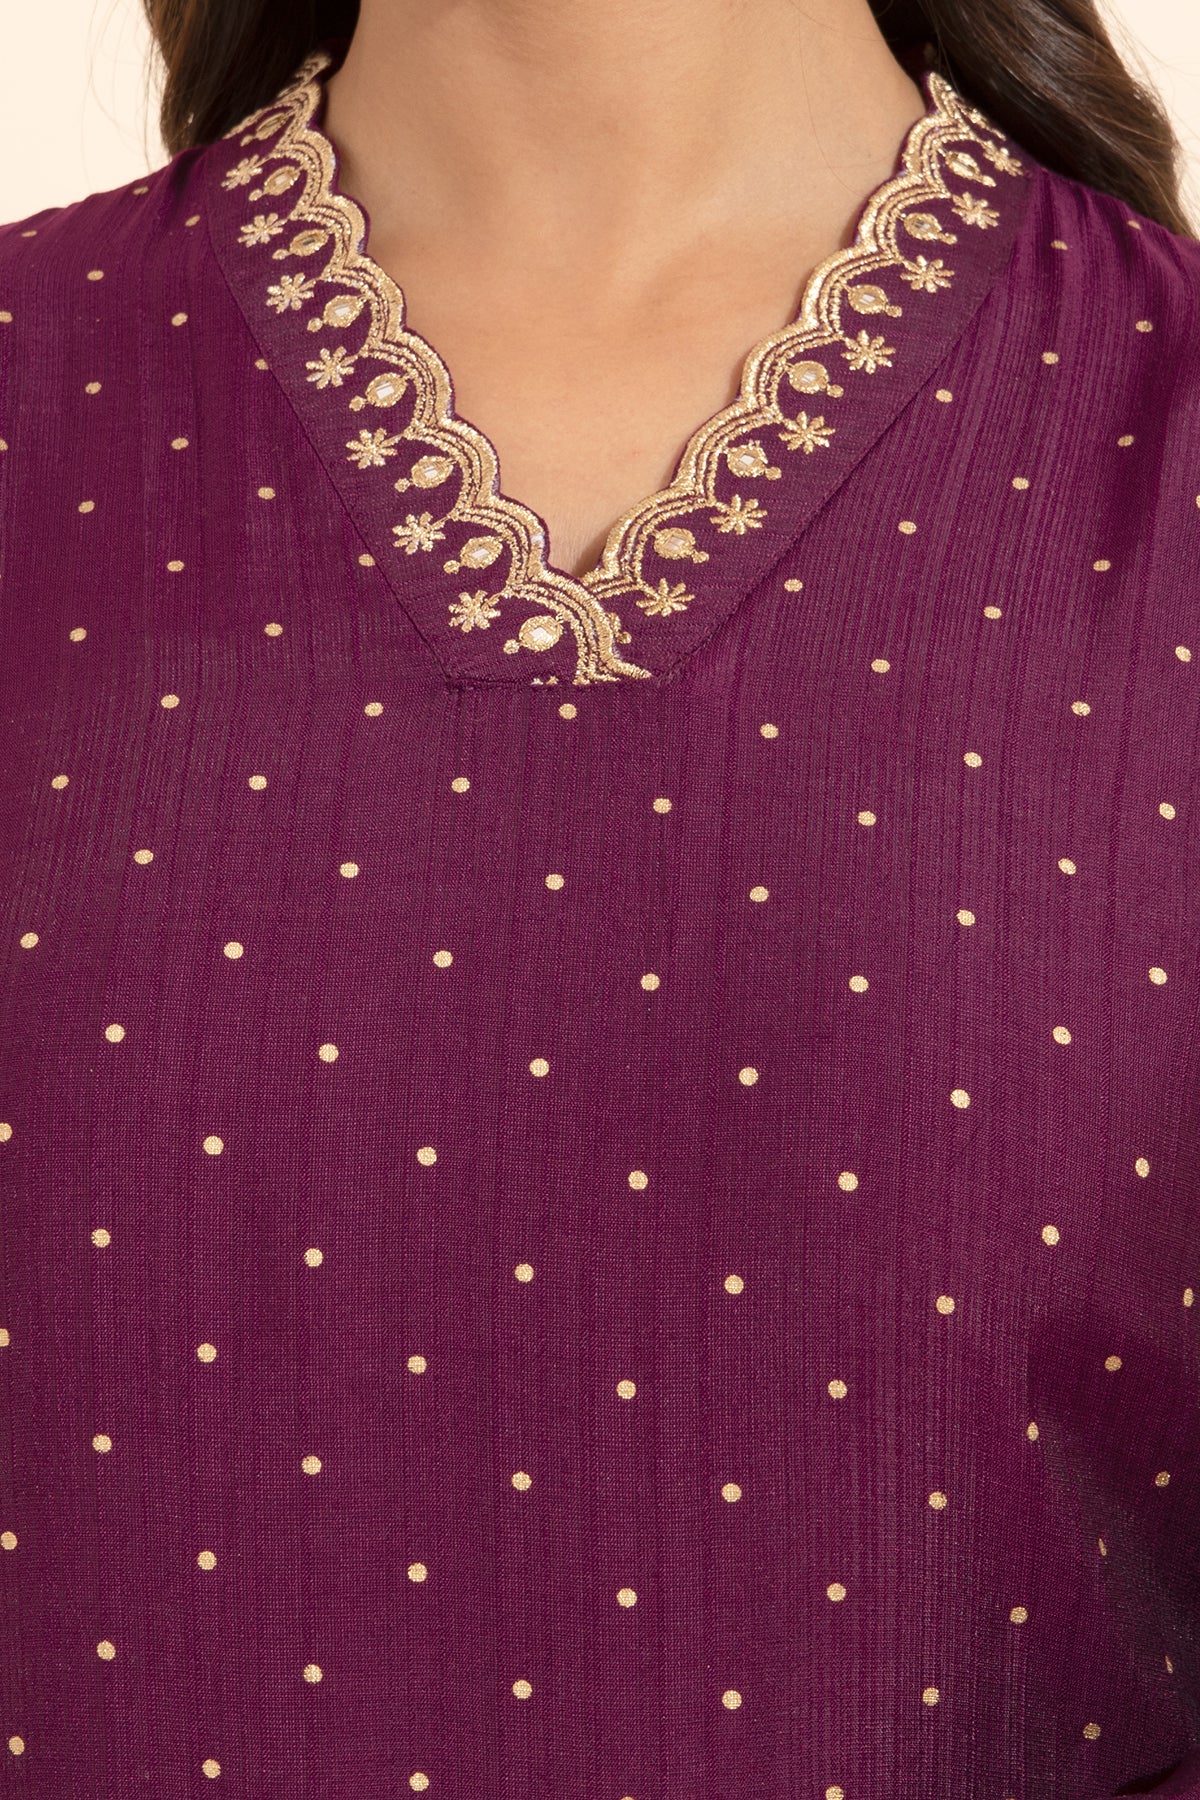 Floral Embroidered Neckline With Allover Polka Dots Printed Kurta - Purple